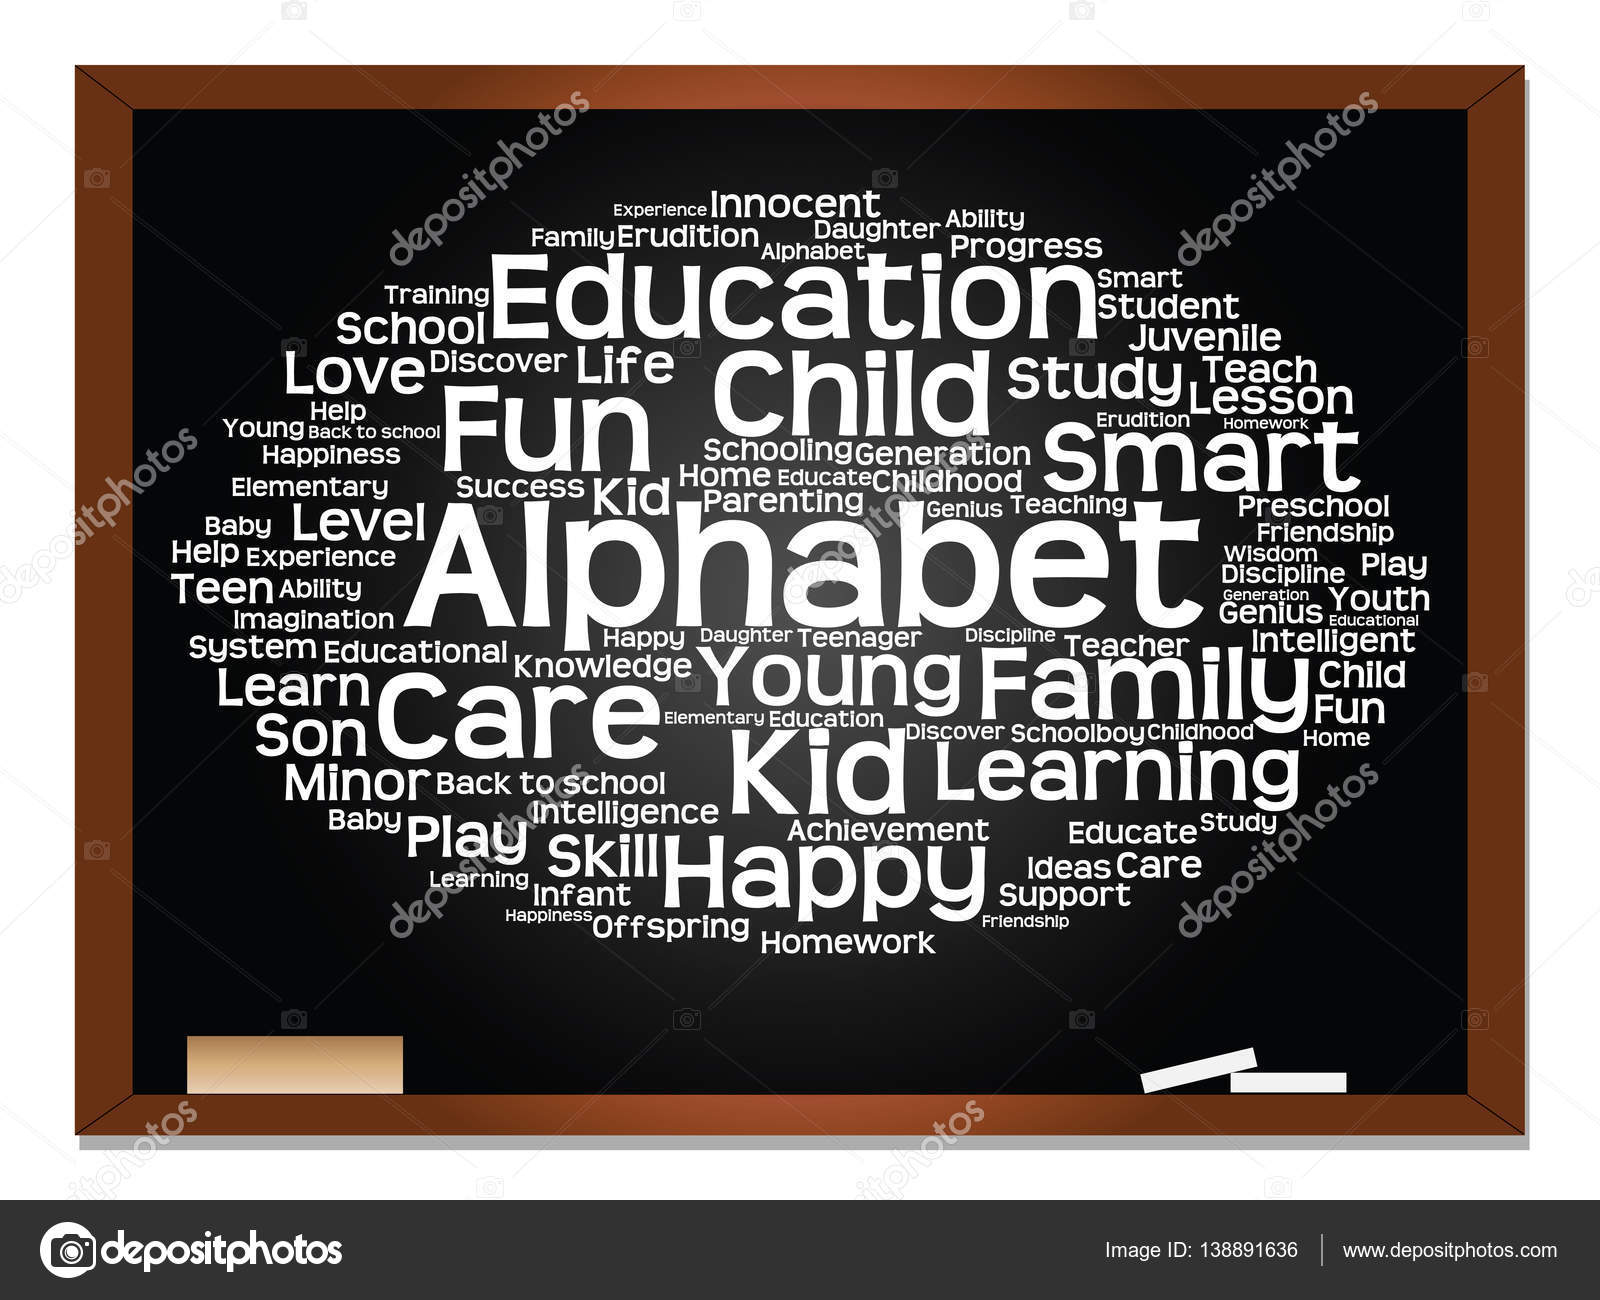 education text word cloud — Stock Photo © design36 #138891636